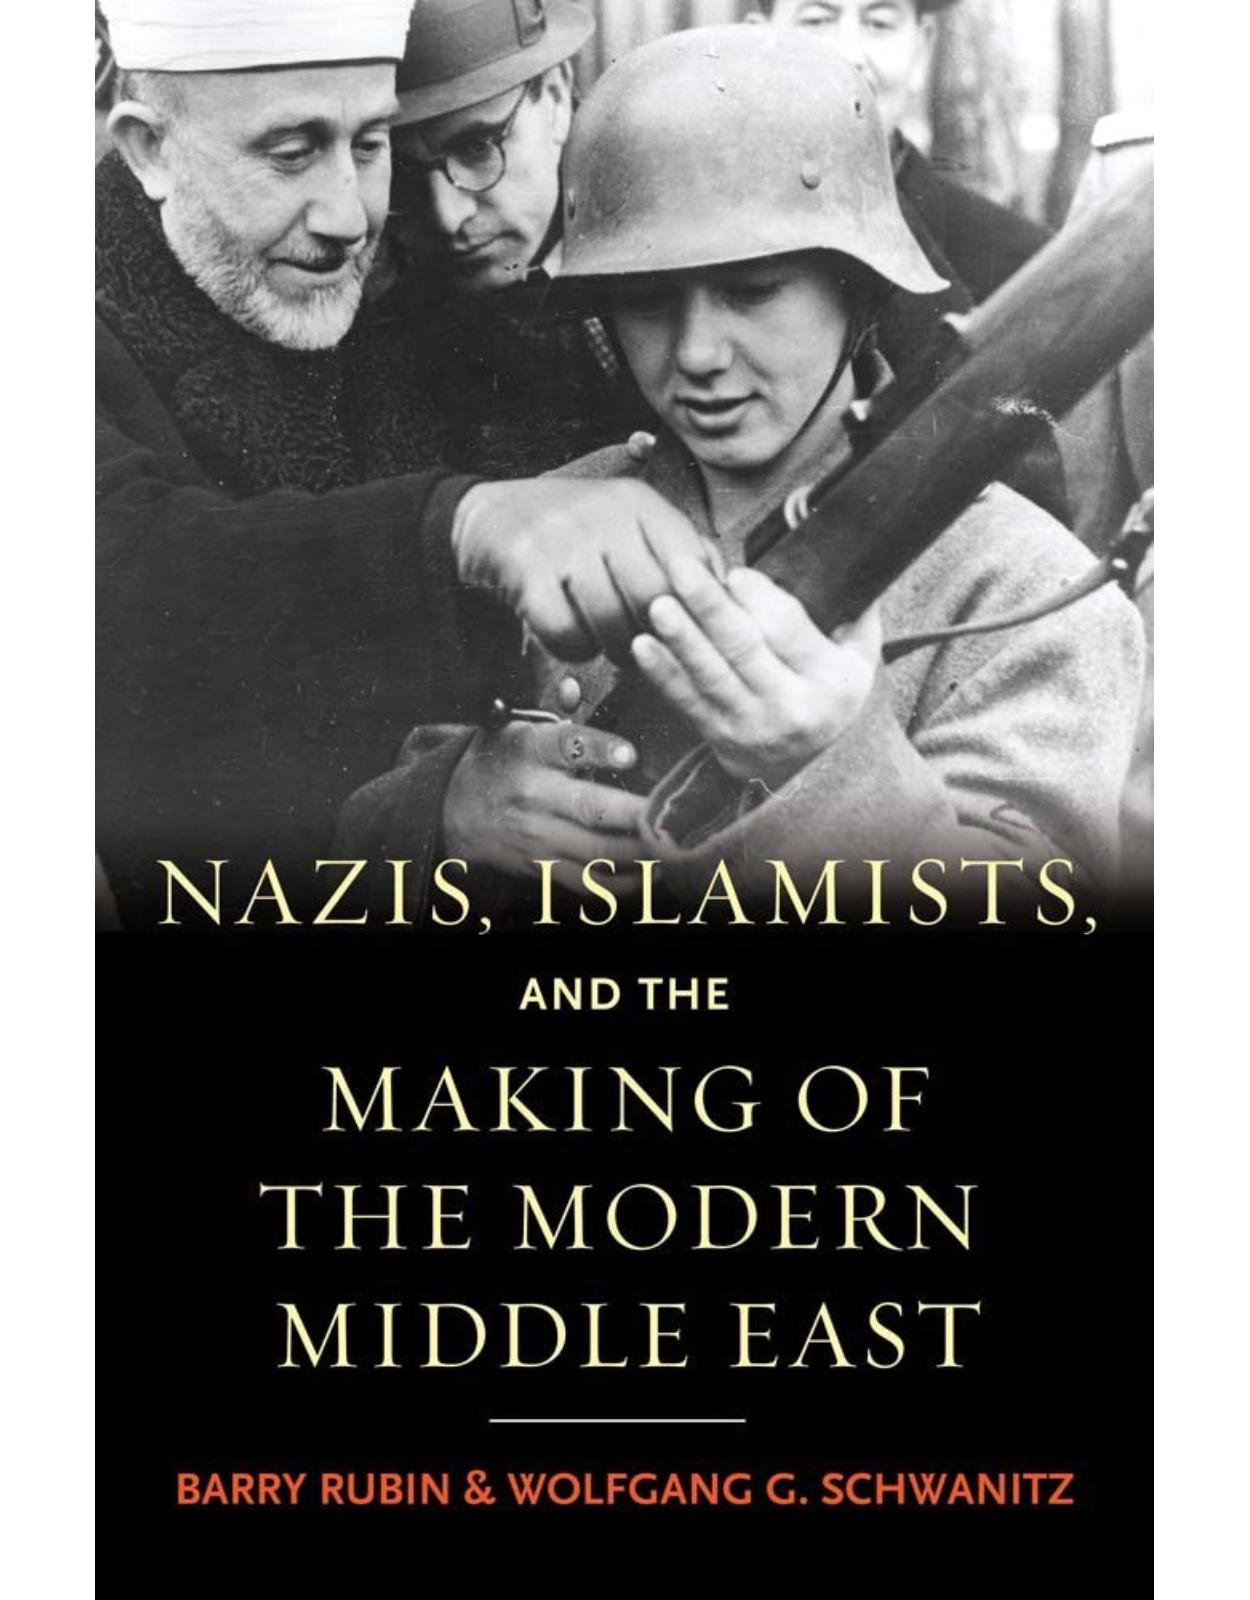 Nazis, Islamists, and the Making of the Modern Middle East.